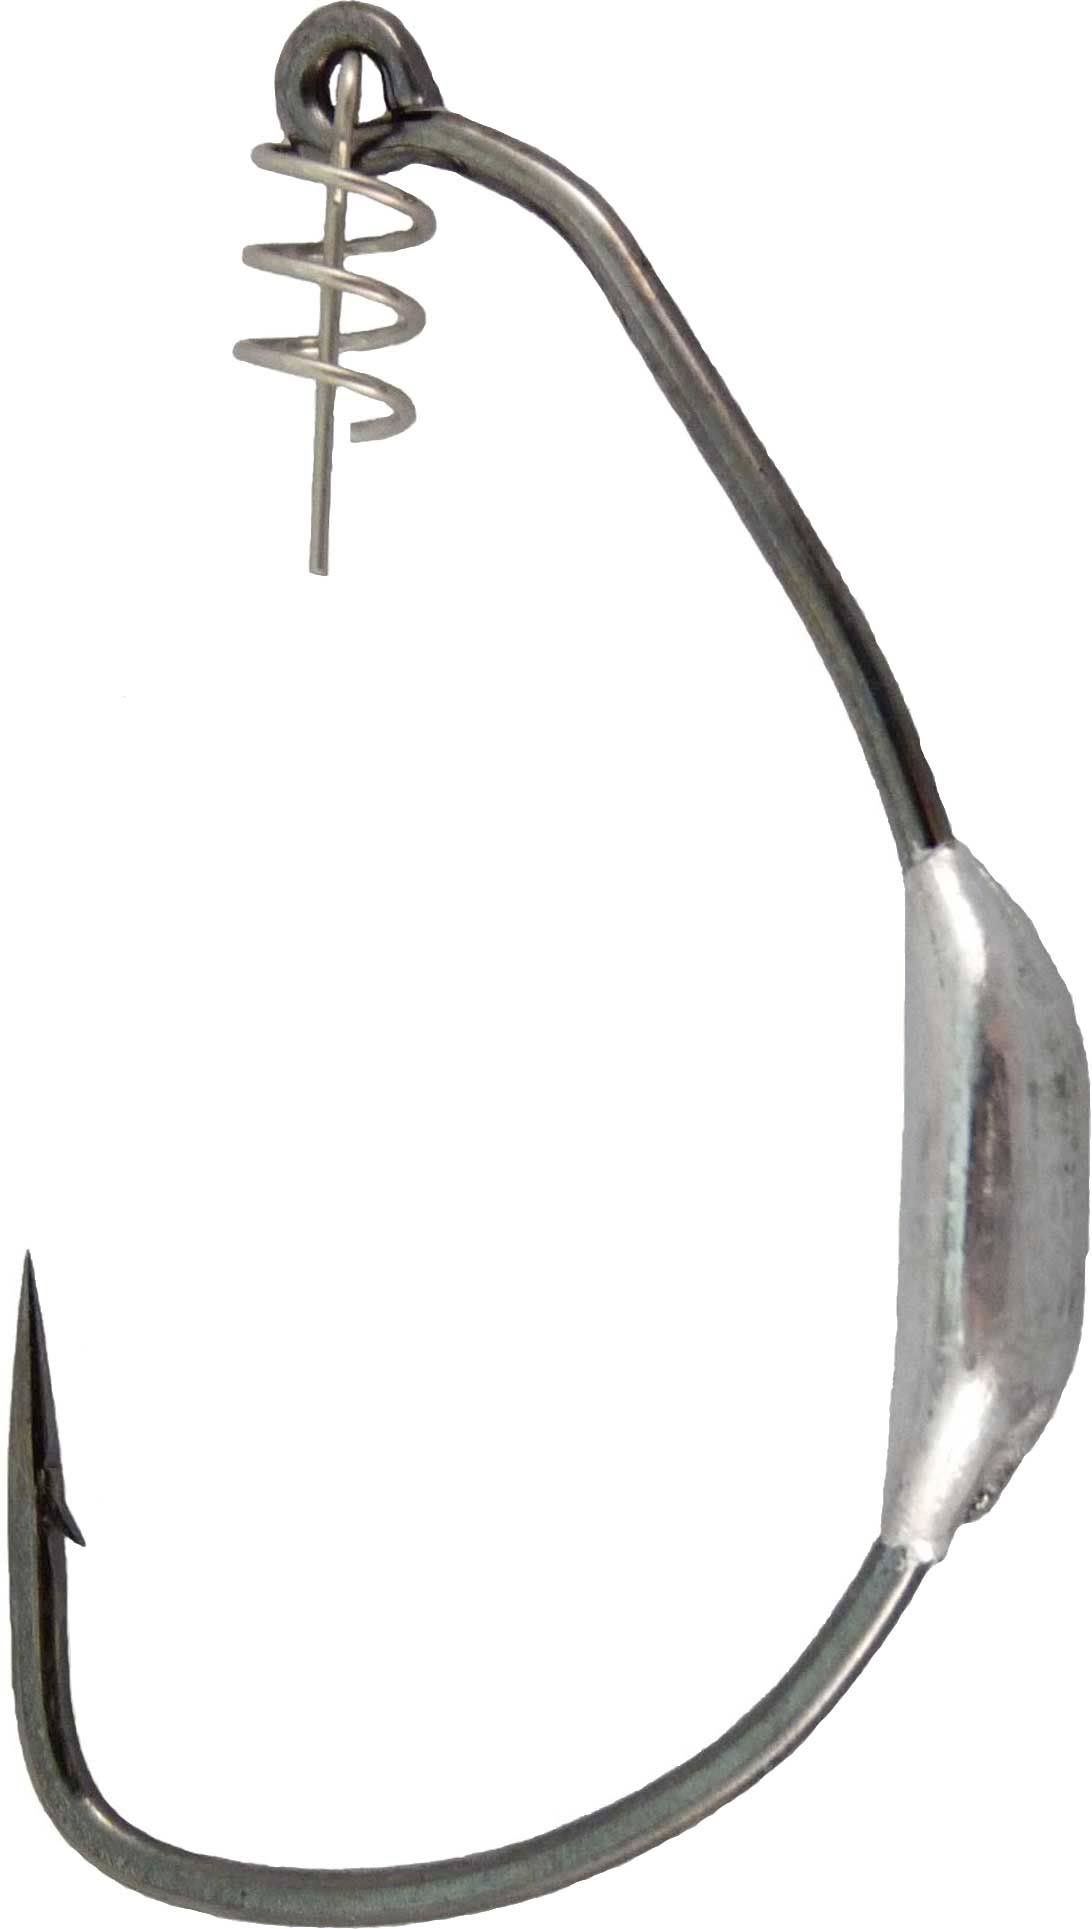 Owner's Weighted Beast Hook - Black Chrome, 10/0, 1/2oz